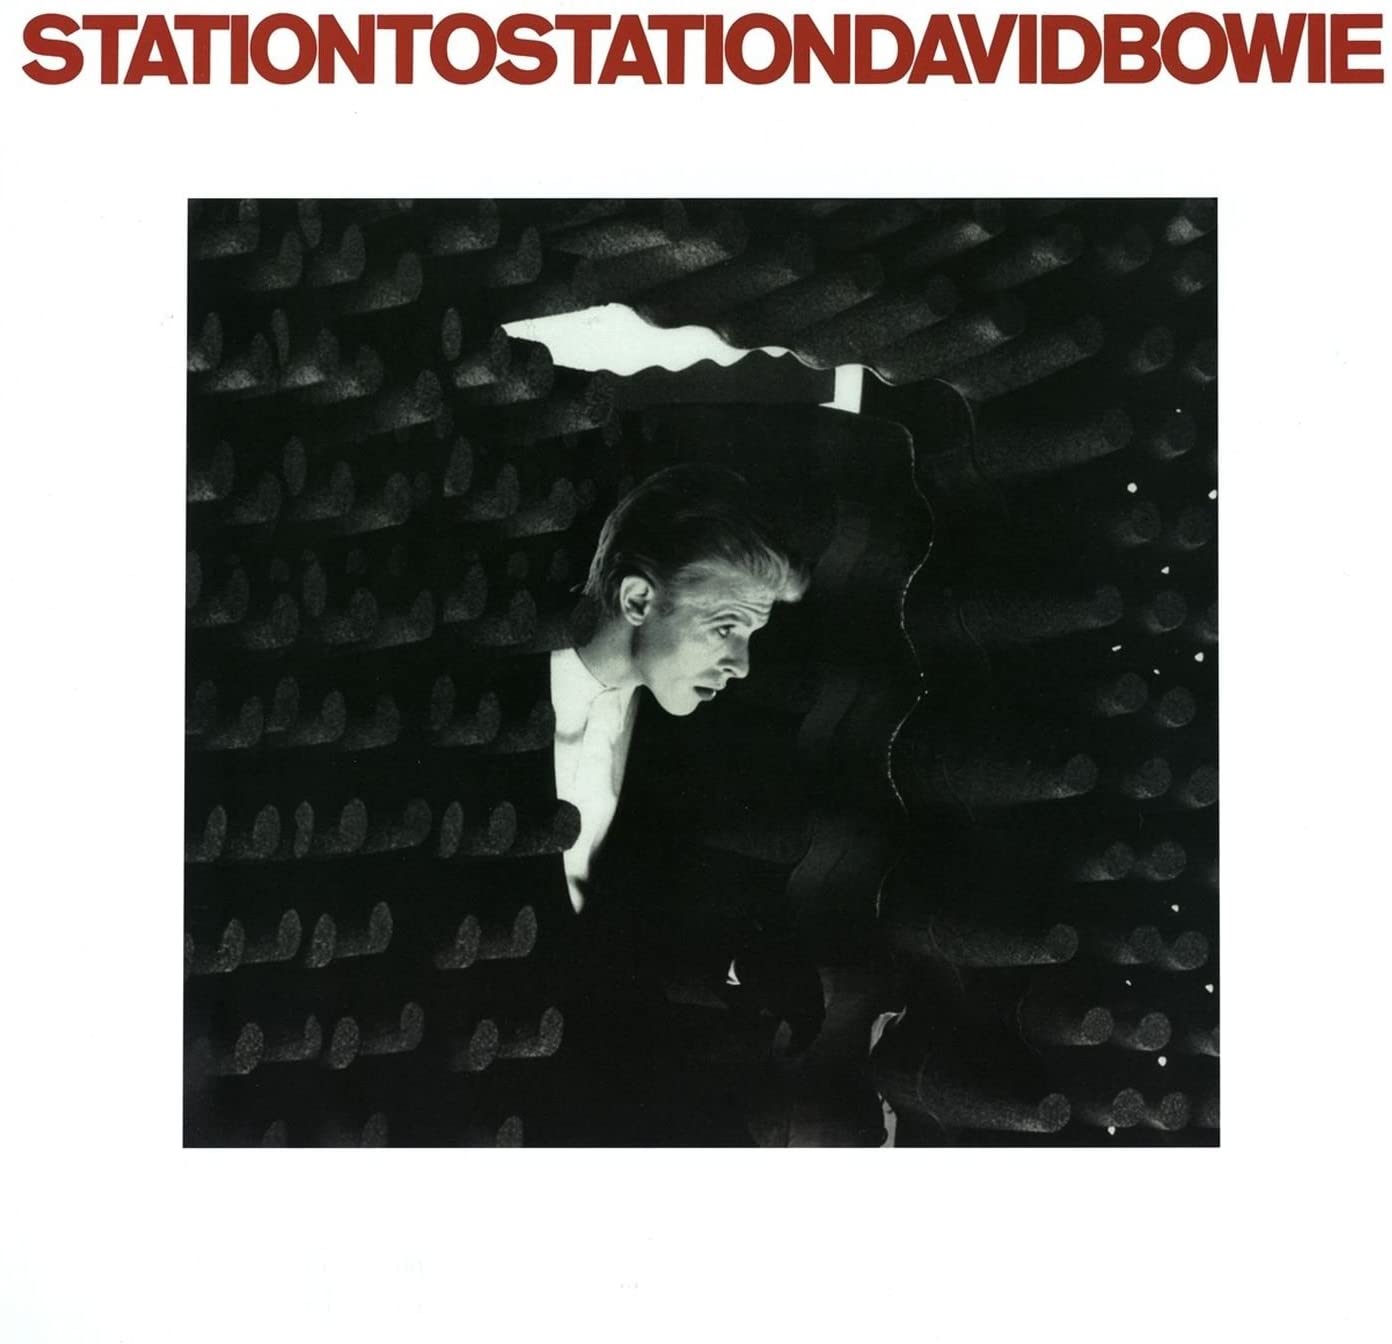 David Bowie’s ‘Station to Station’ Turns 45 | Anniversary Retrospective